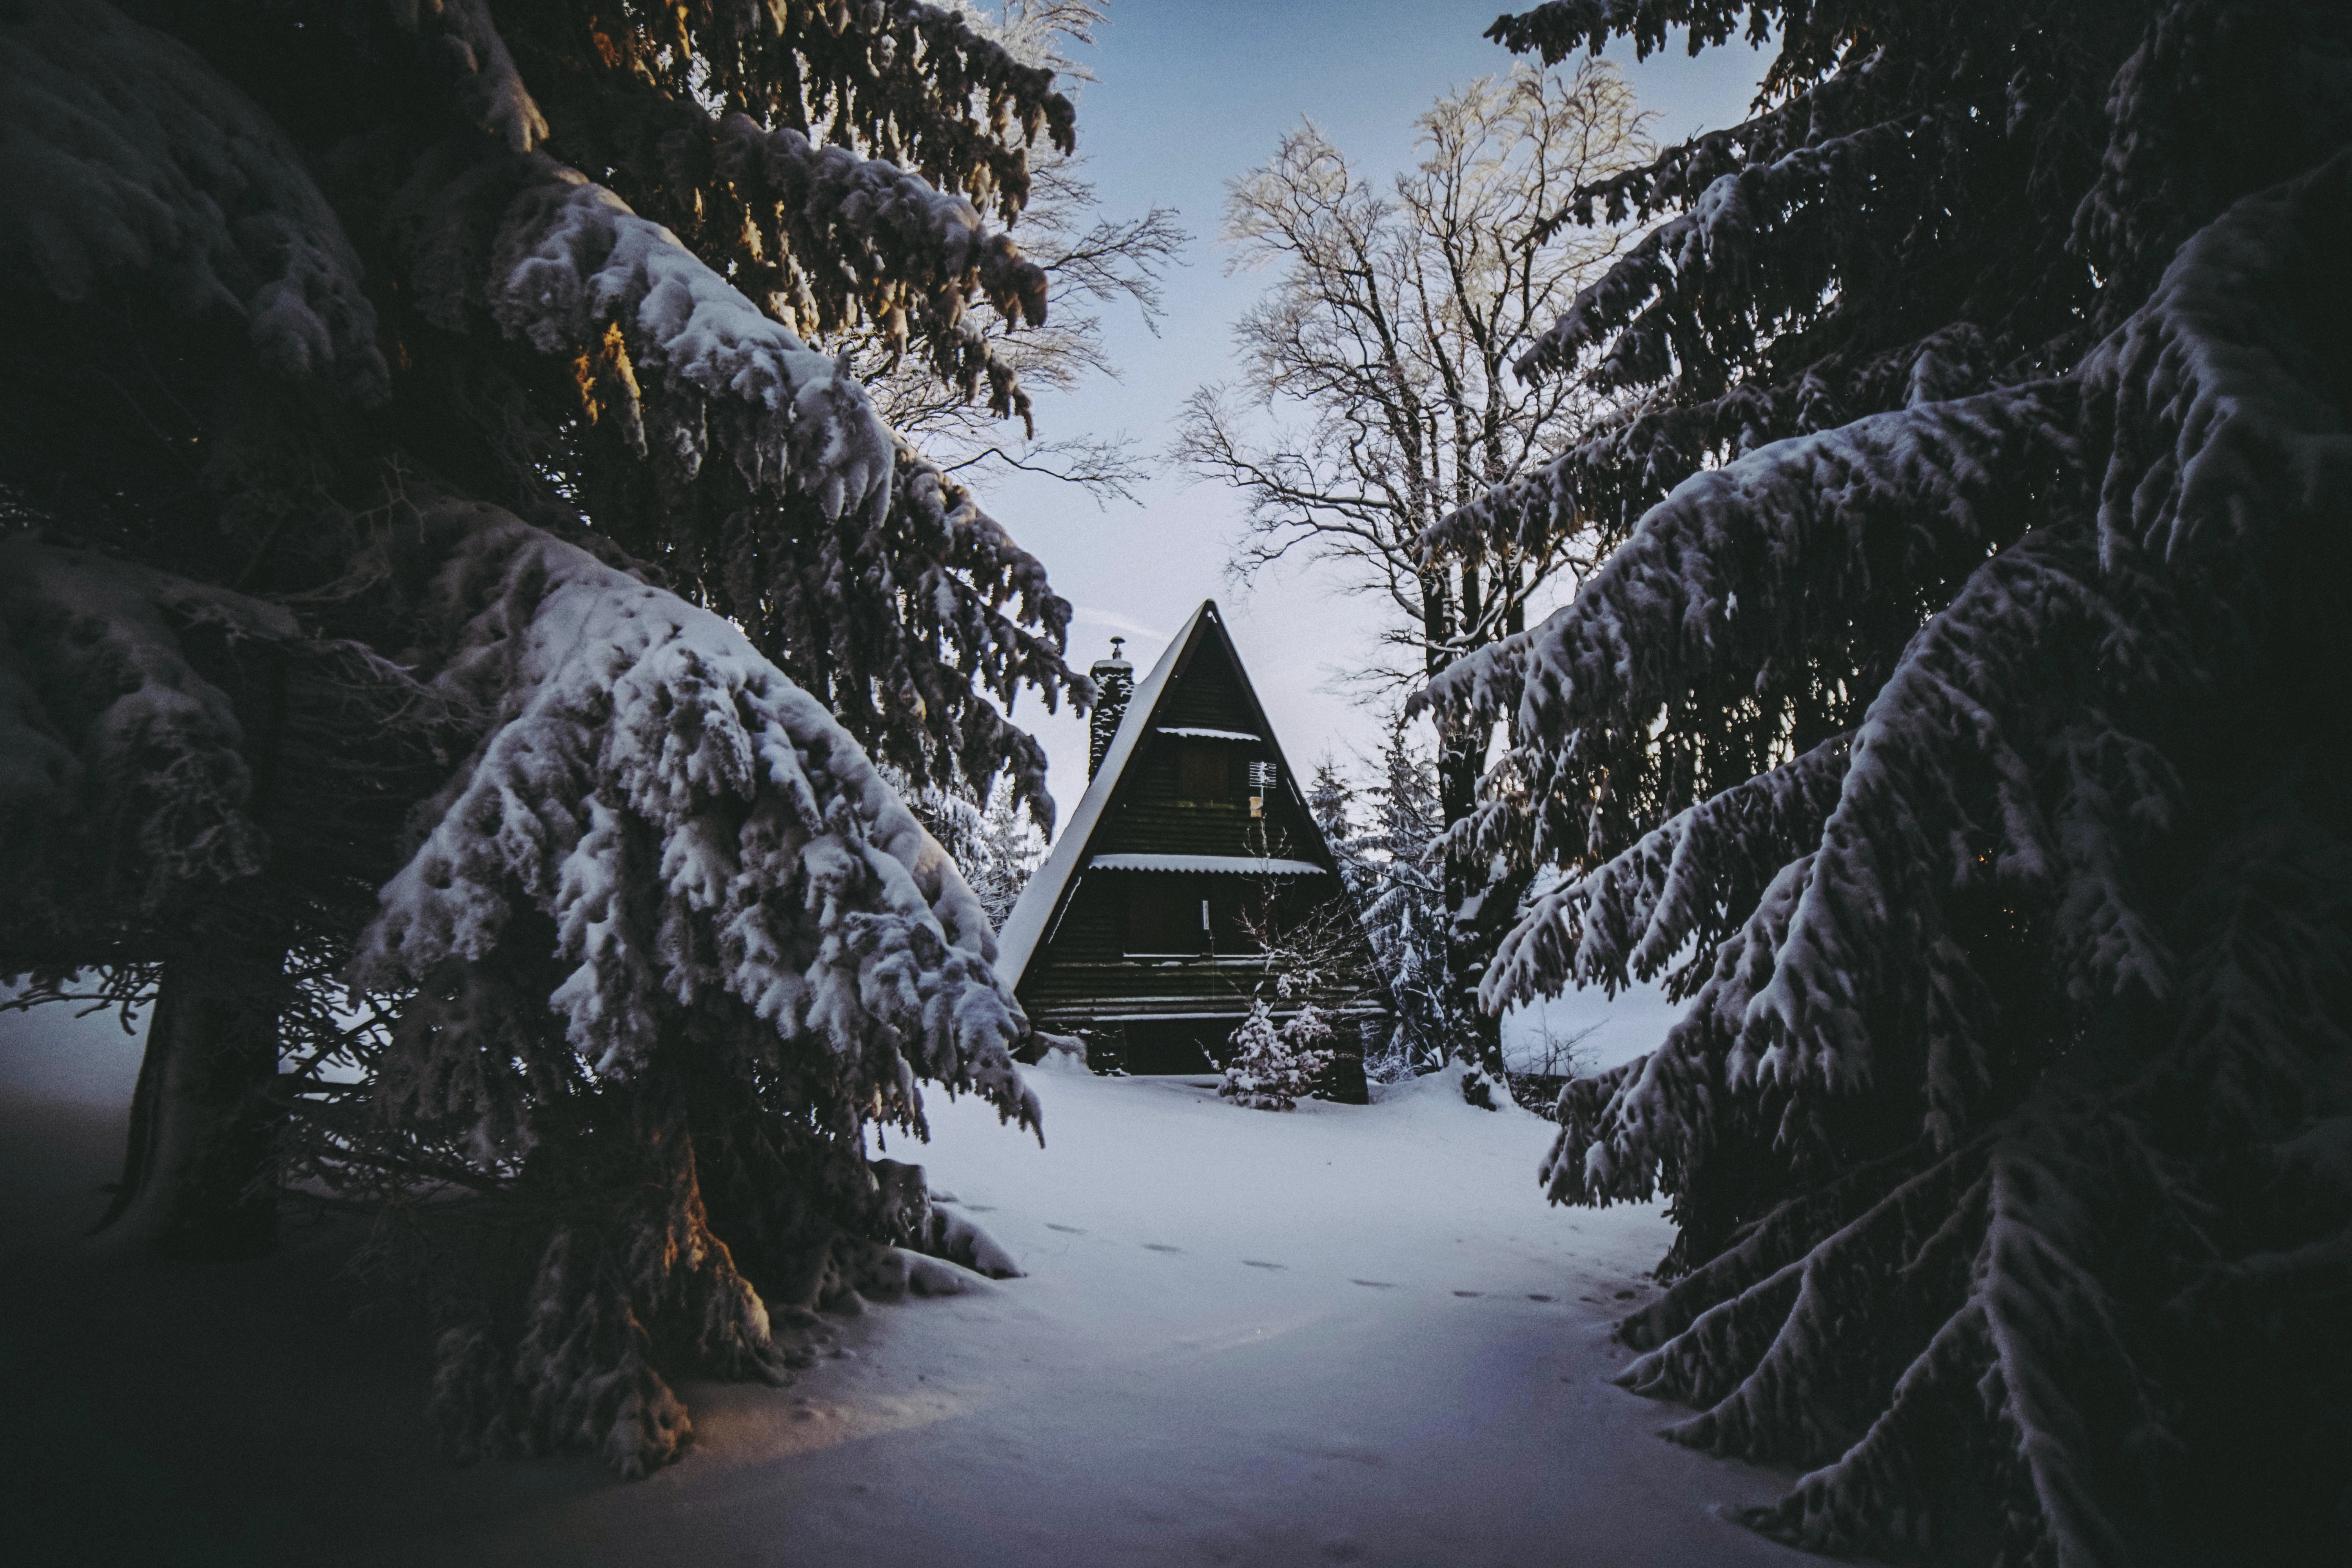 coziness, winter, nature, snow, forest, small house, lodge, comfort